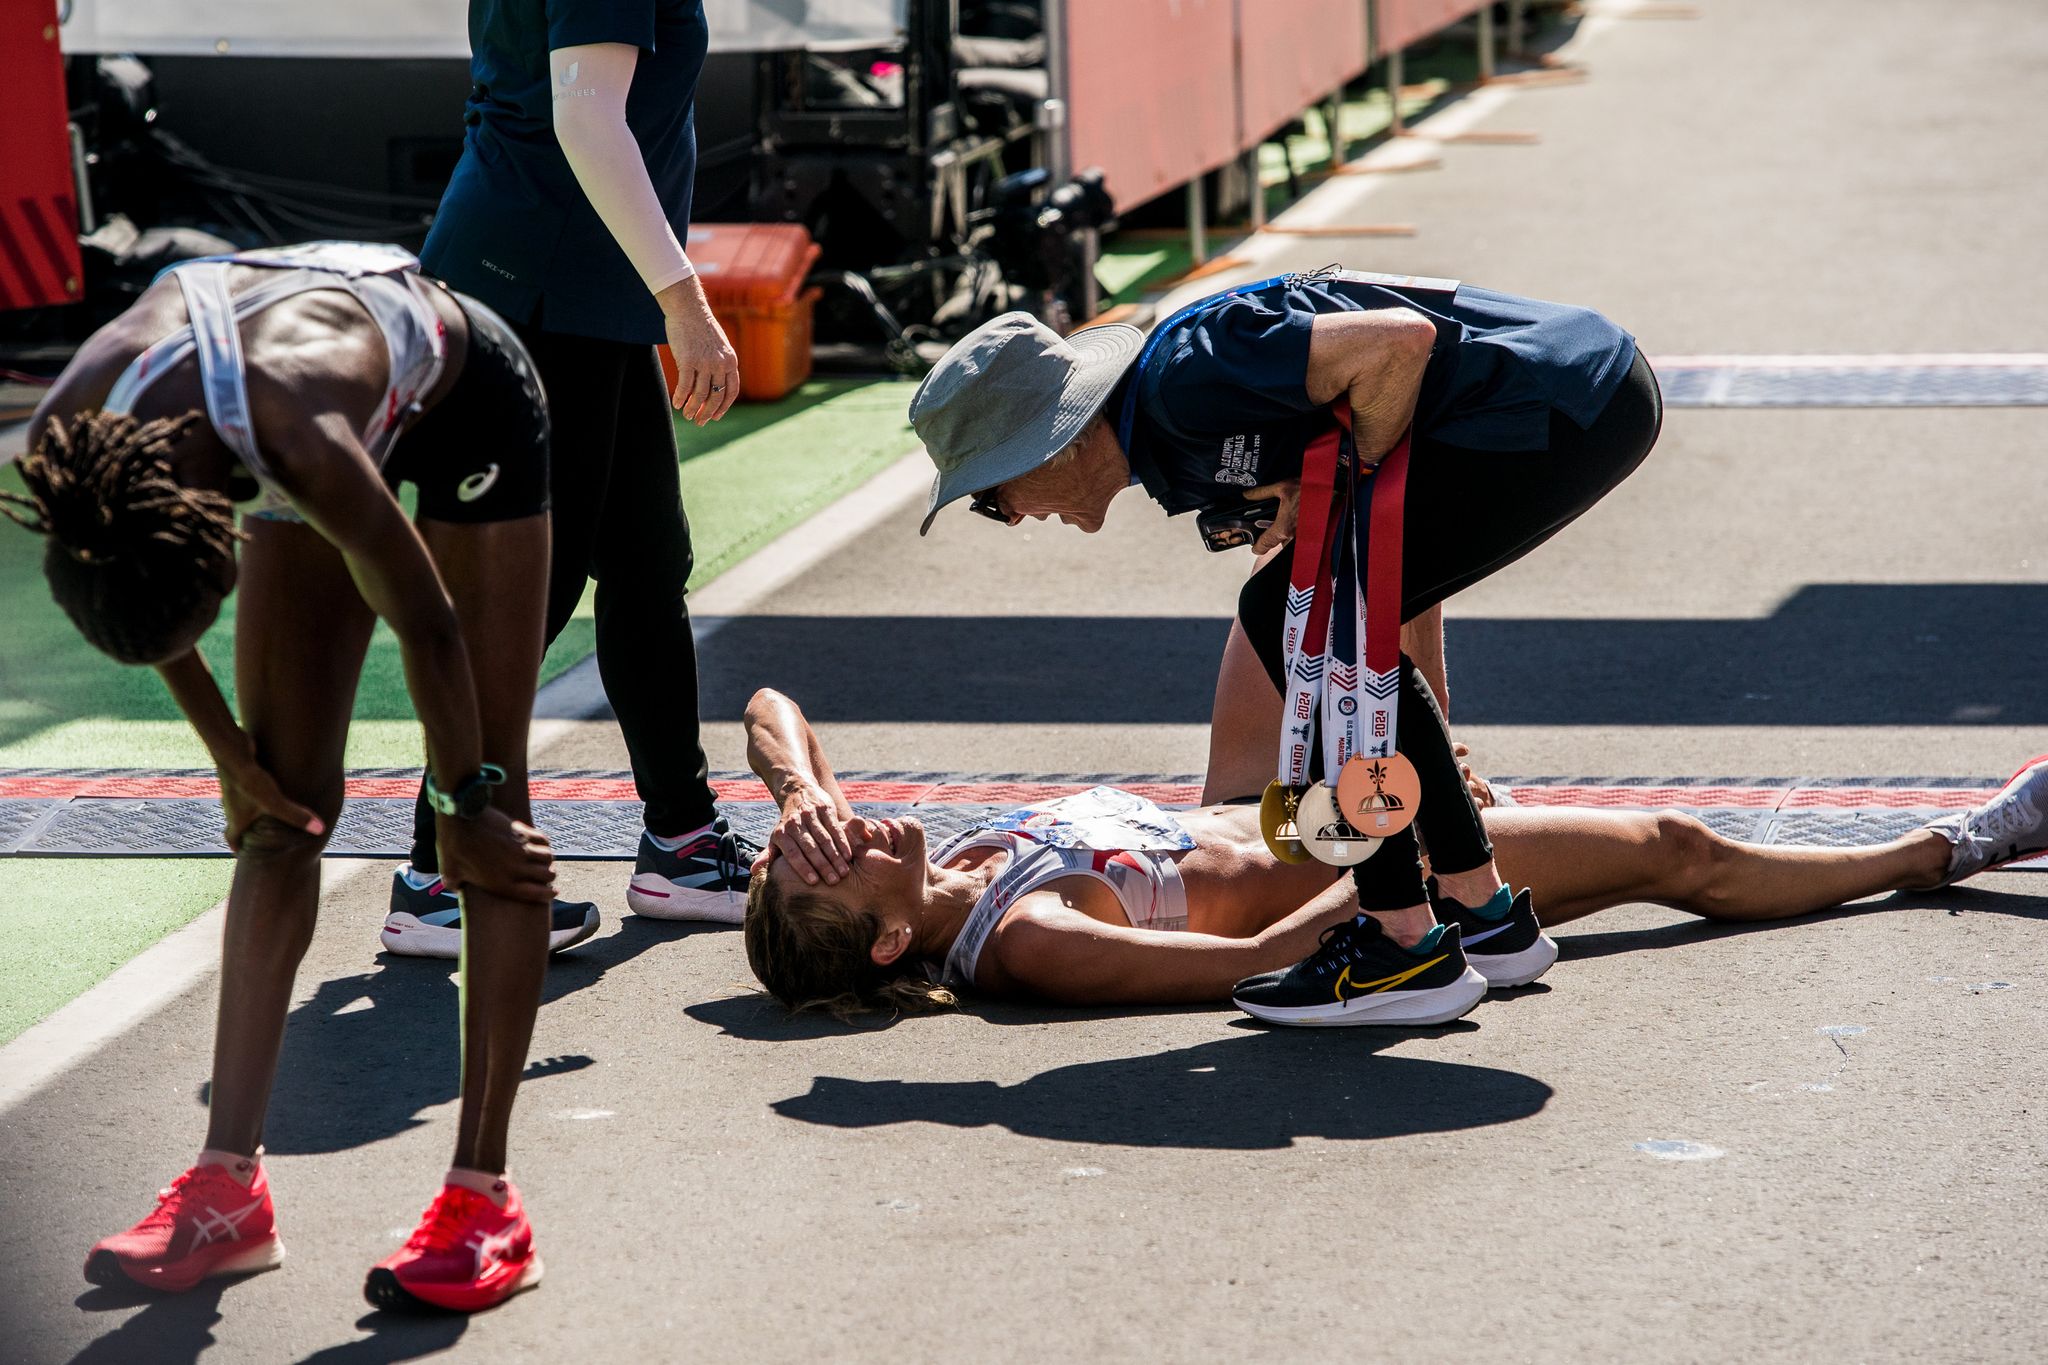 The Best Photos from the 2024 Olympic Marathon Trials